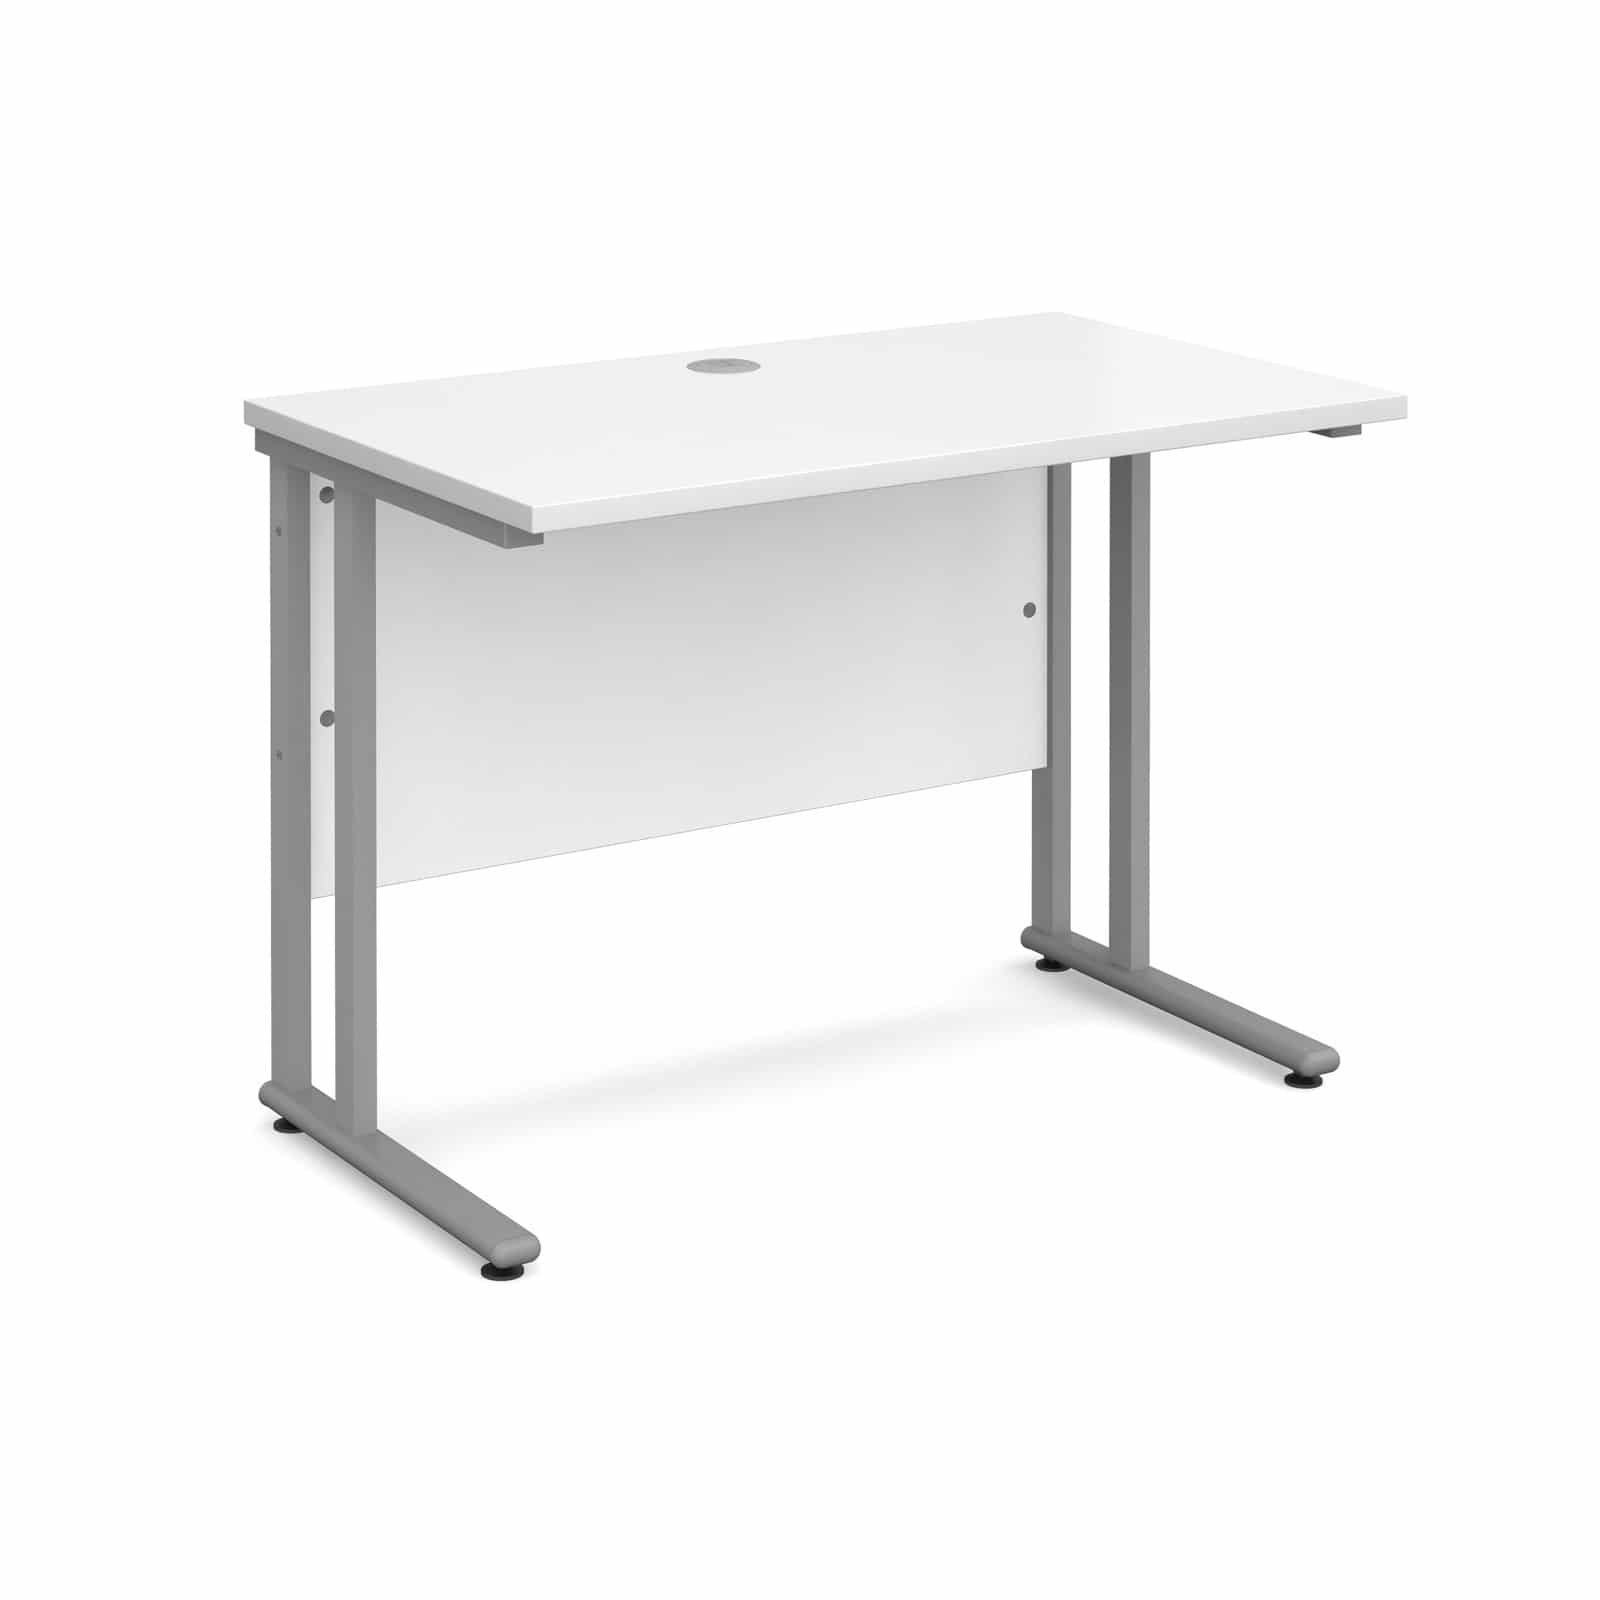 Choosing A Desk For Your Home Office Bimi Office Furniture Online